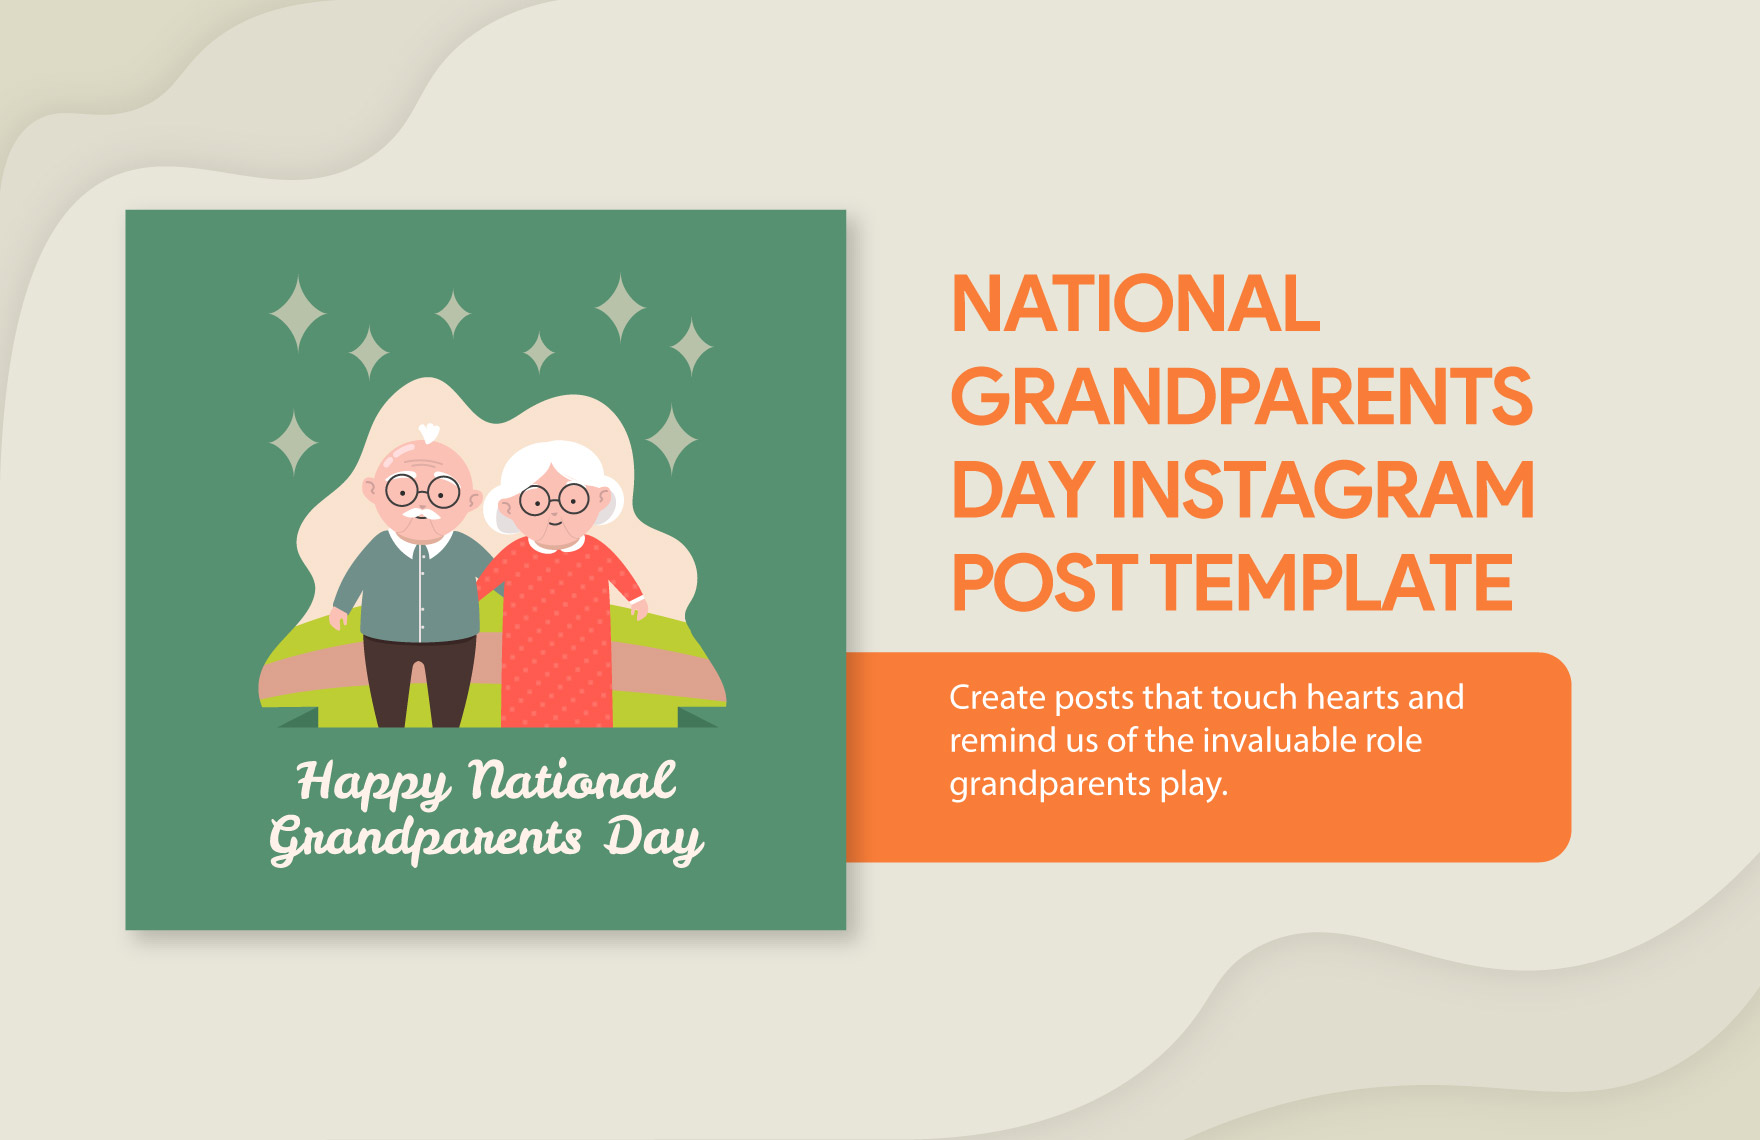 Free National Grandparents Day Instagram Post Template in Illustrator, PSD, PNG